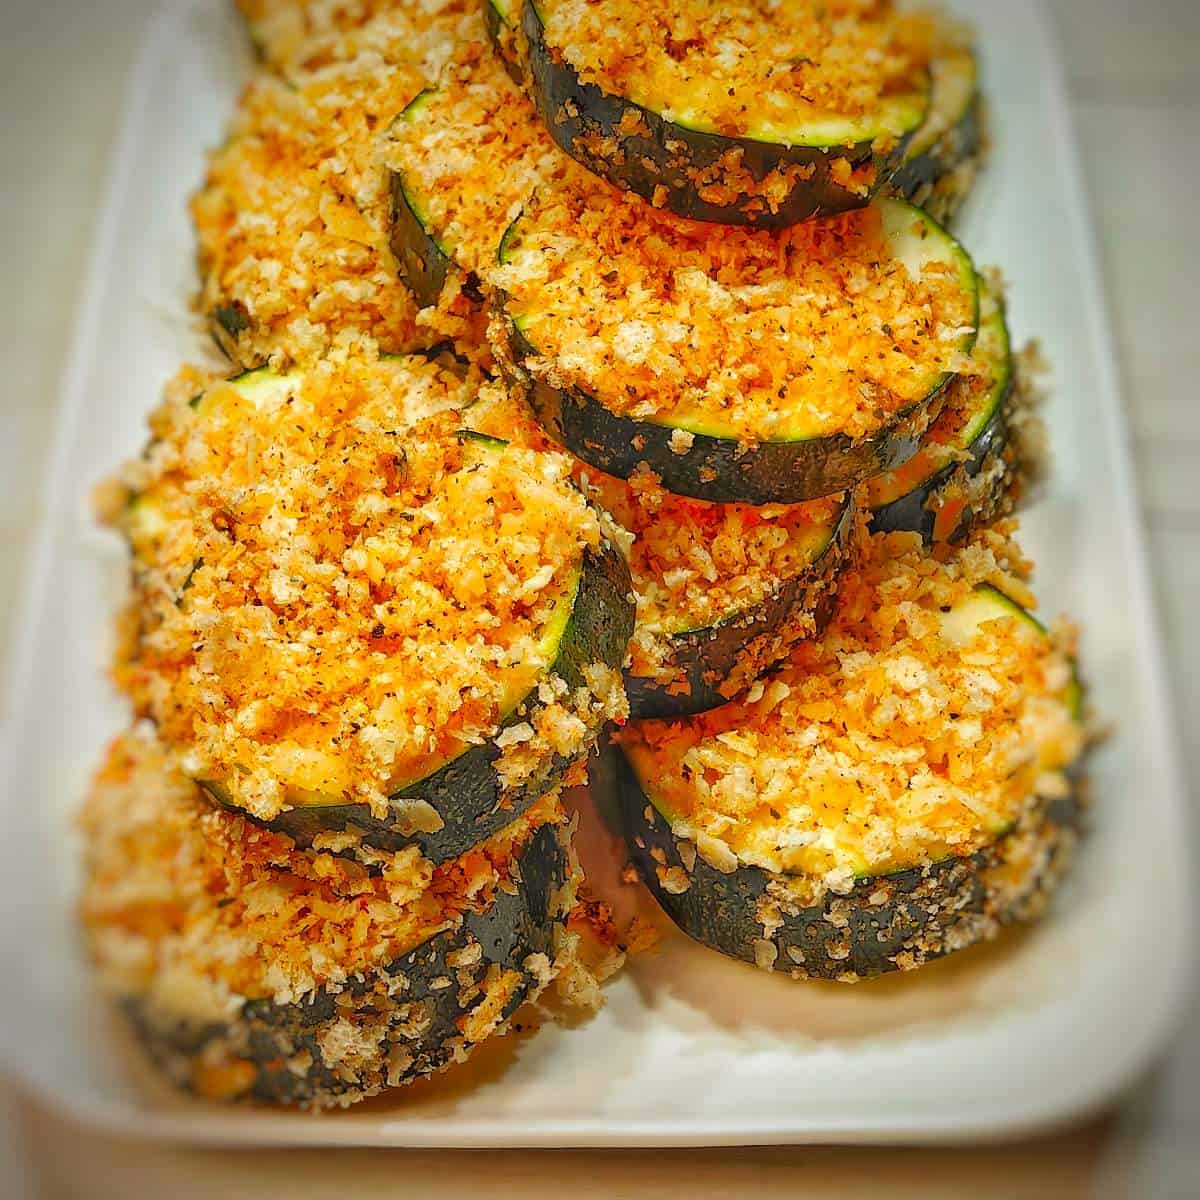 dip zucchini slices into the mixture